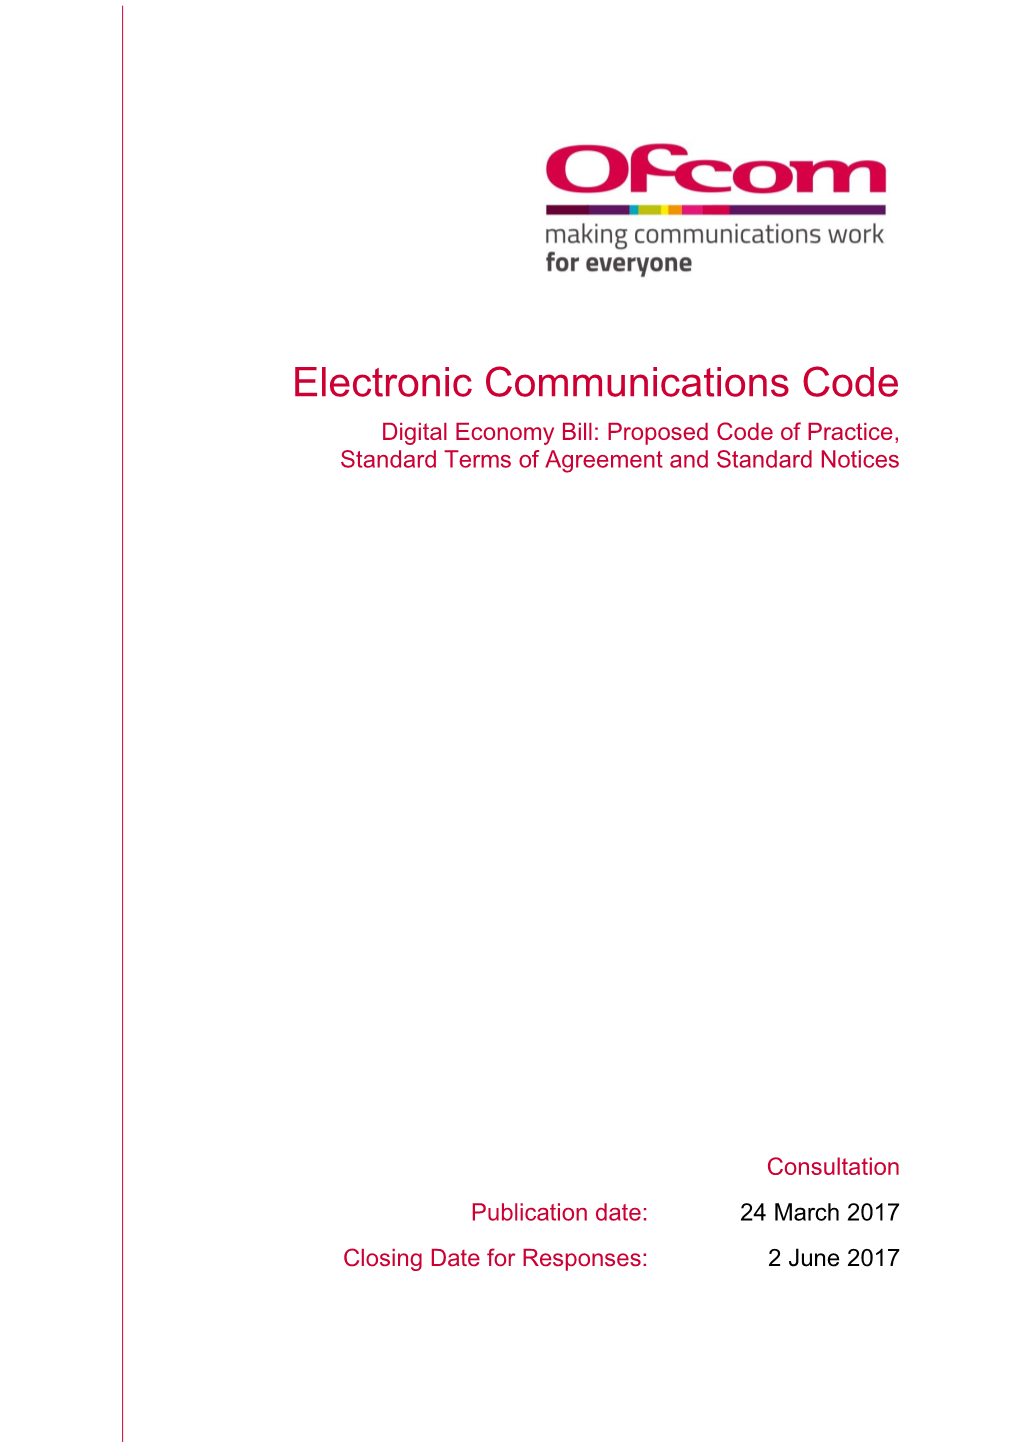 Electronic Communications Code Digital Economy Bill: Proposed Code of Practice, Standard Terms of Agreement and Standard Notices